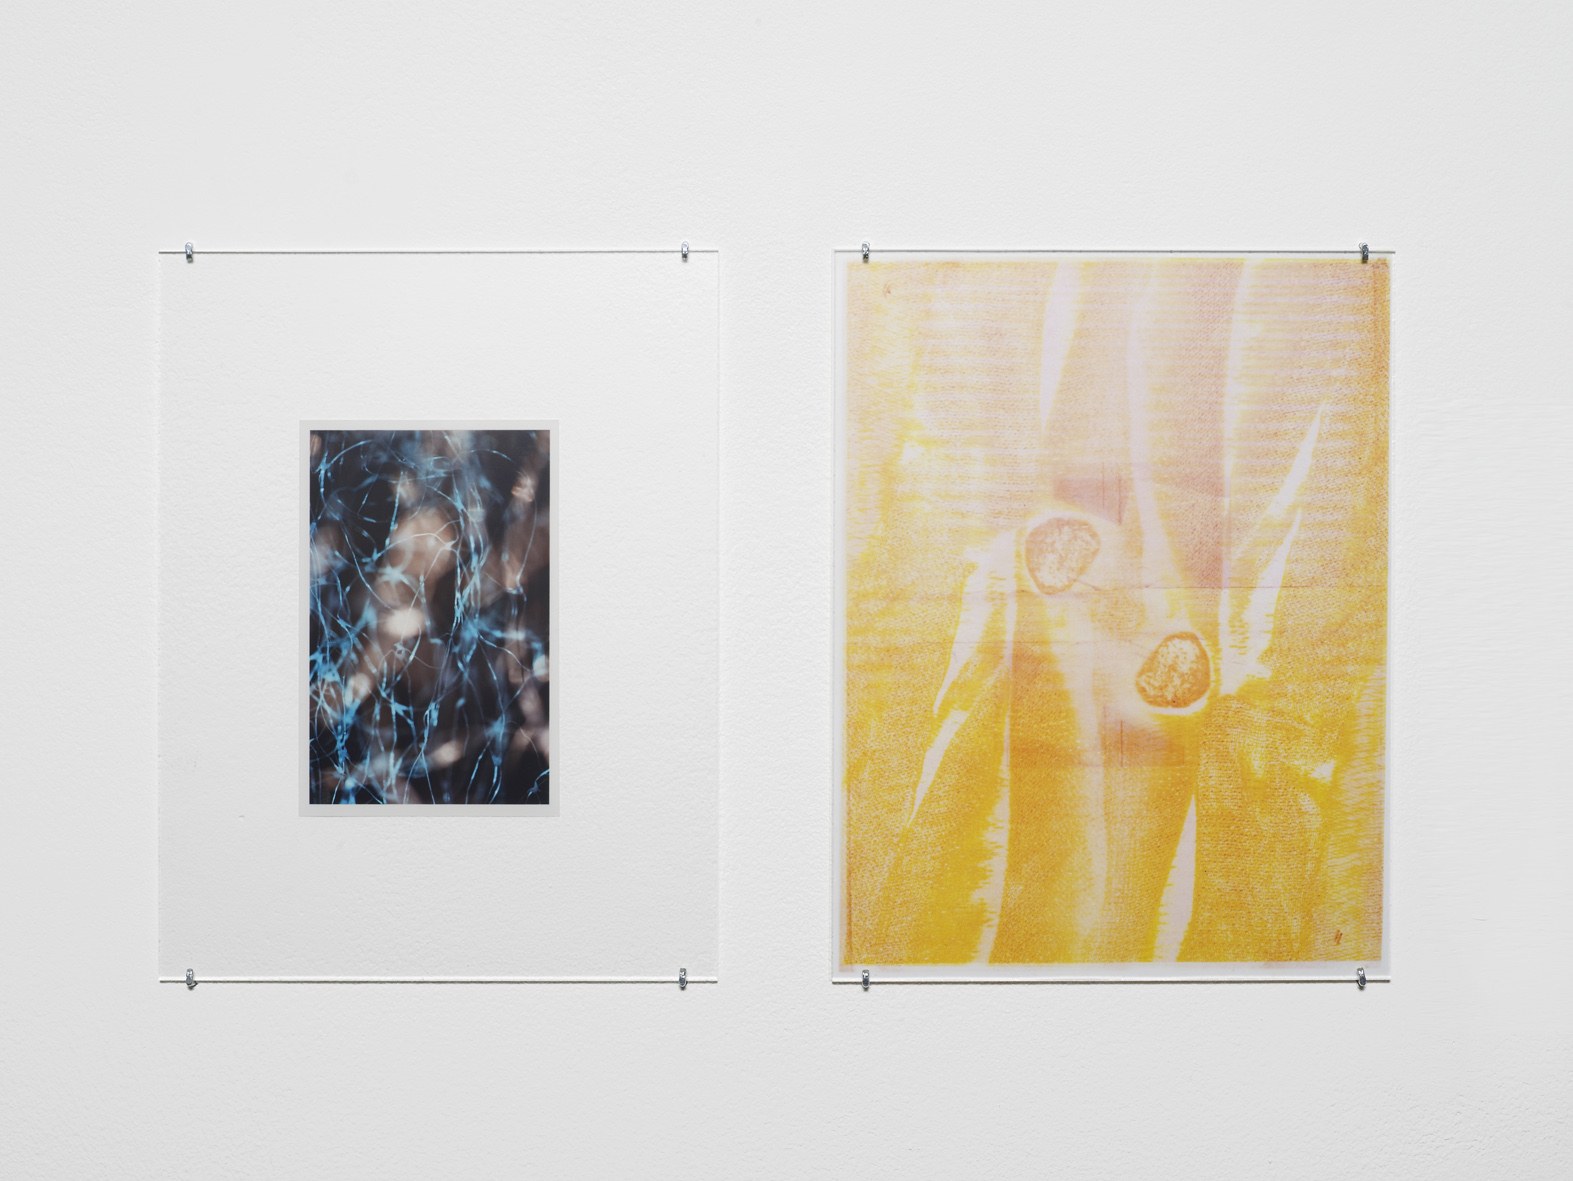     Untitled 2014-2015 Unique C-print, inkjet print, inkjet print on transparency, non-reflective perspex, L shaped pins&nbsp; 2 parts, each: 27.9 x 21.5 cm / 11 x 8.5 in 